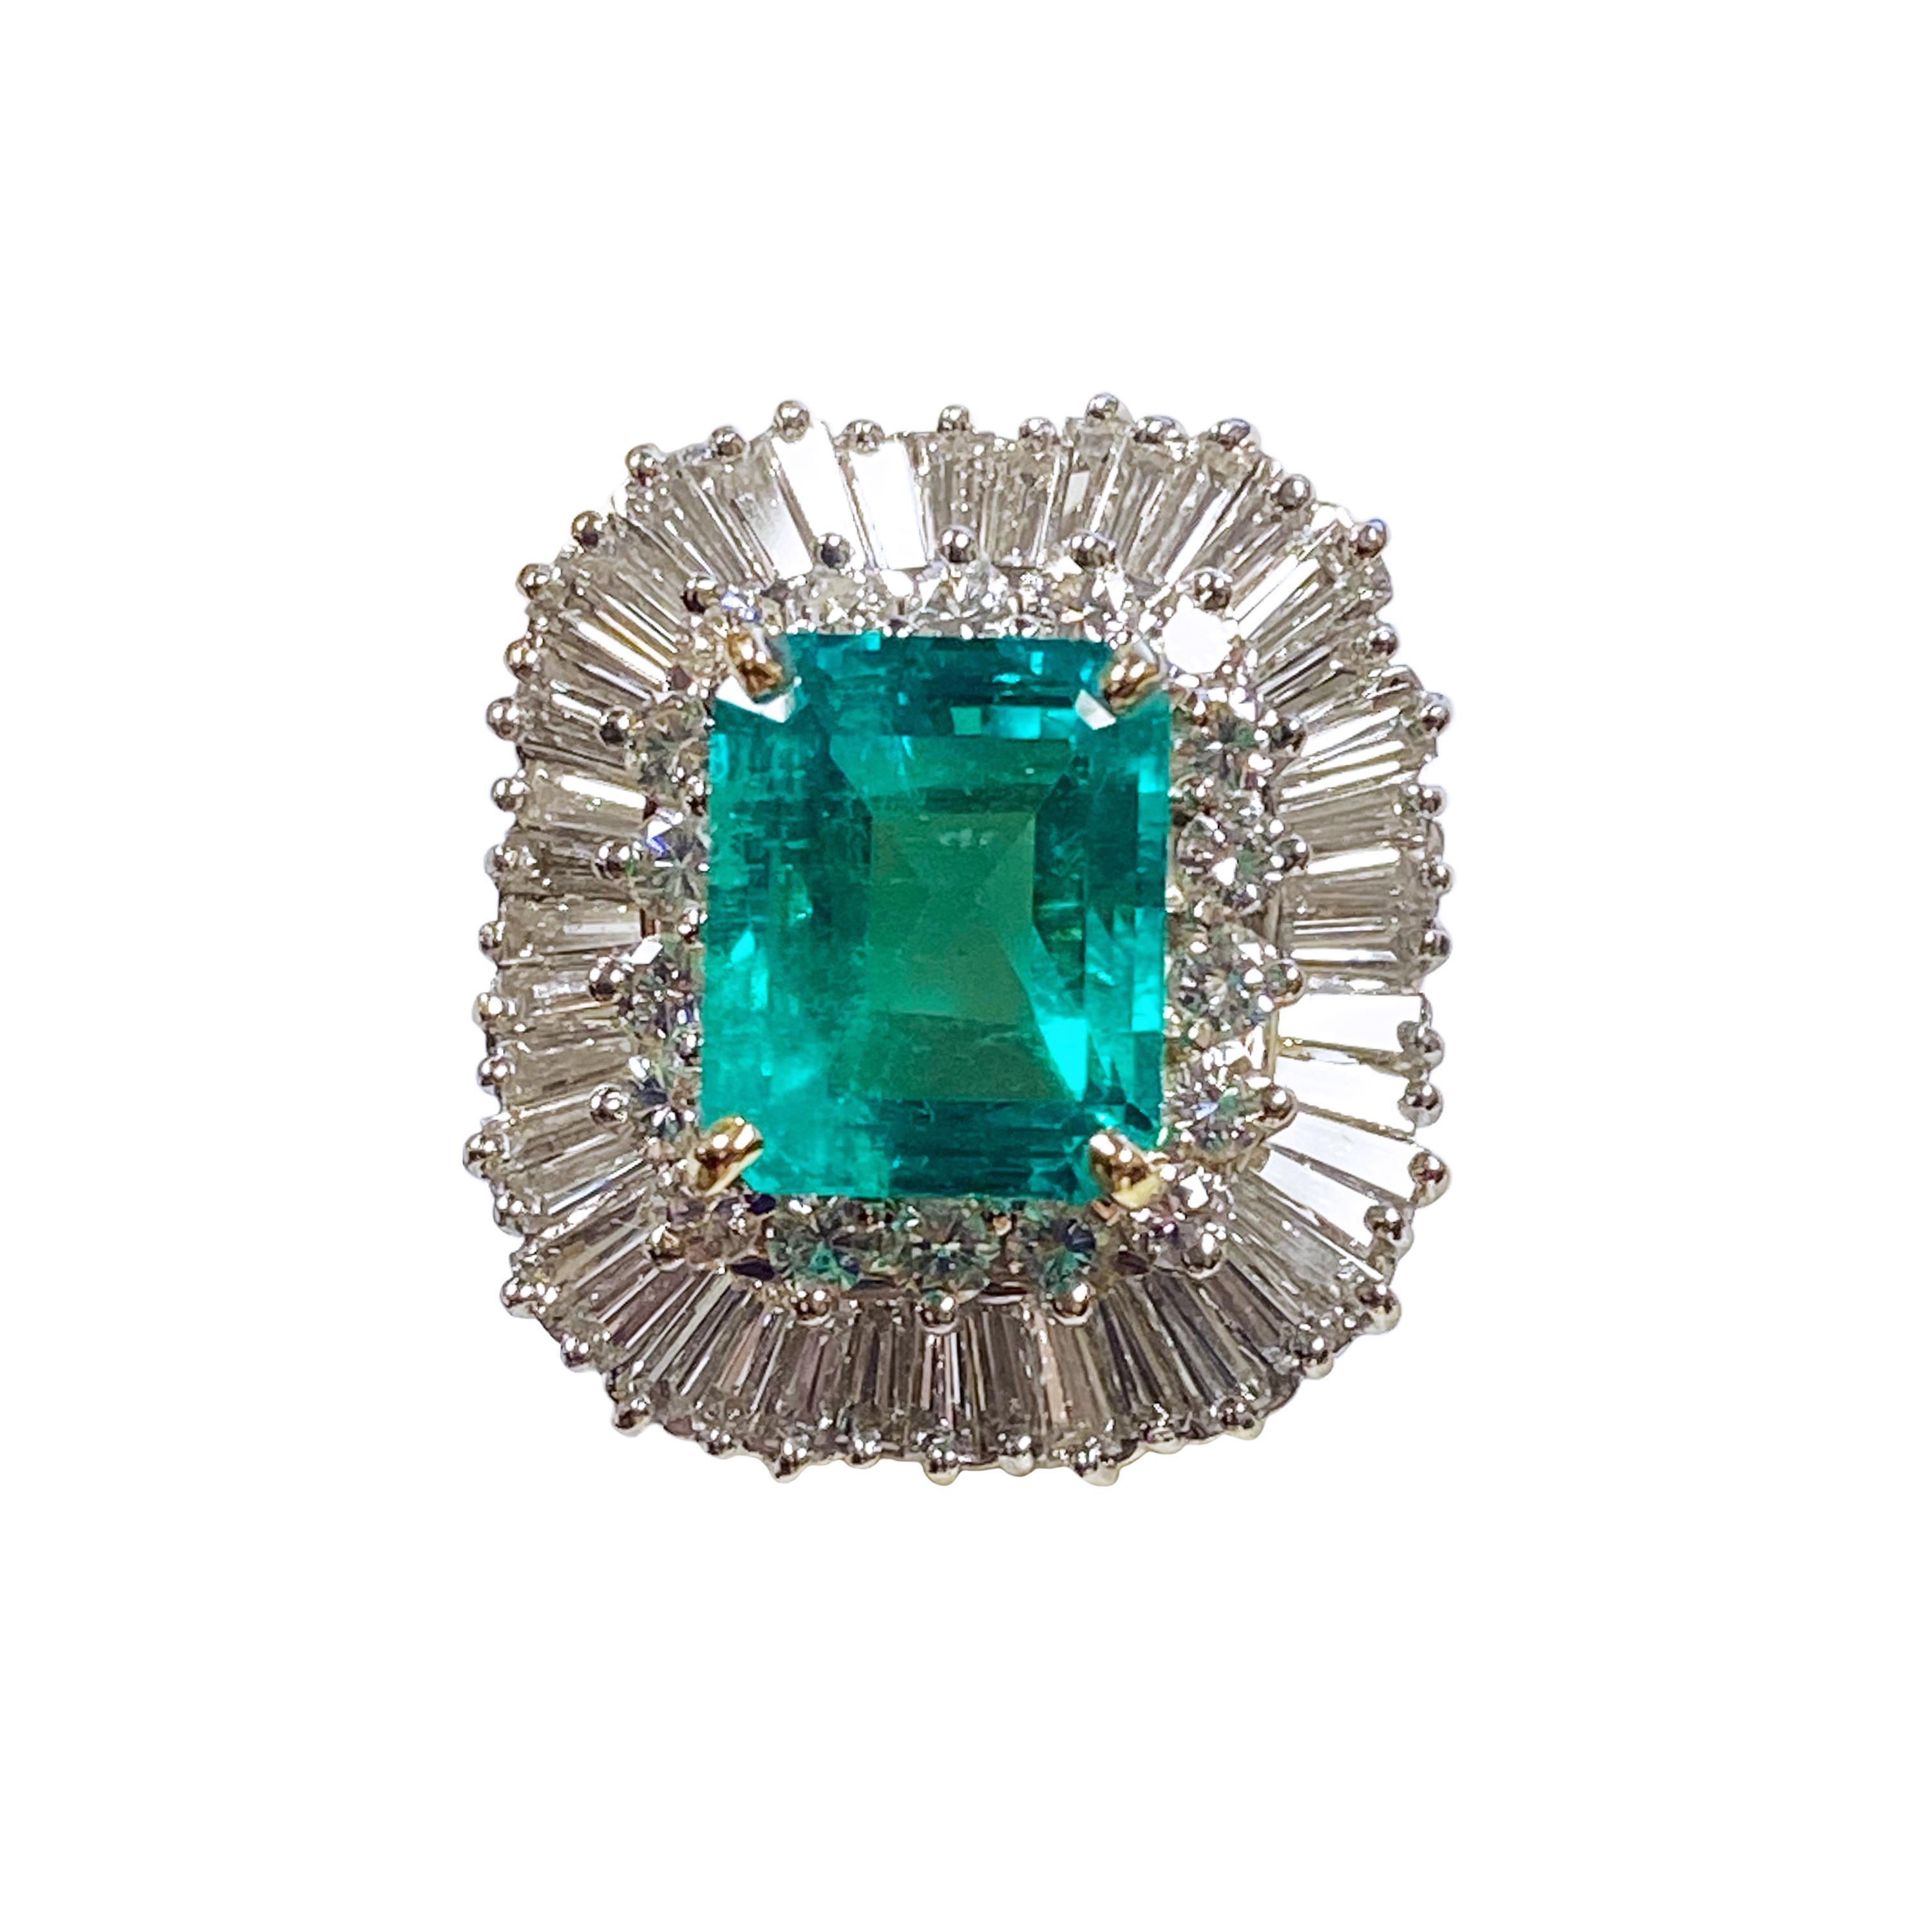 Circa 2000 Large and impressive Emerald and Diamond Ring, hand fabricated in 18k Yellow Gold with an 18k White Gold top section, the top of the ring measures 7/8 X 3/4 inches. Centrally set with a Very Fine Color step cut Emerald of Colombian origin